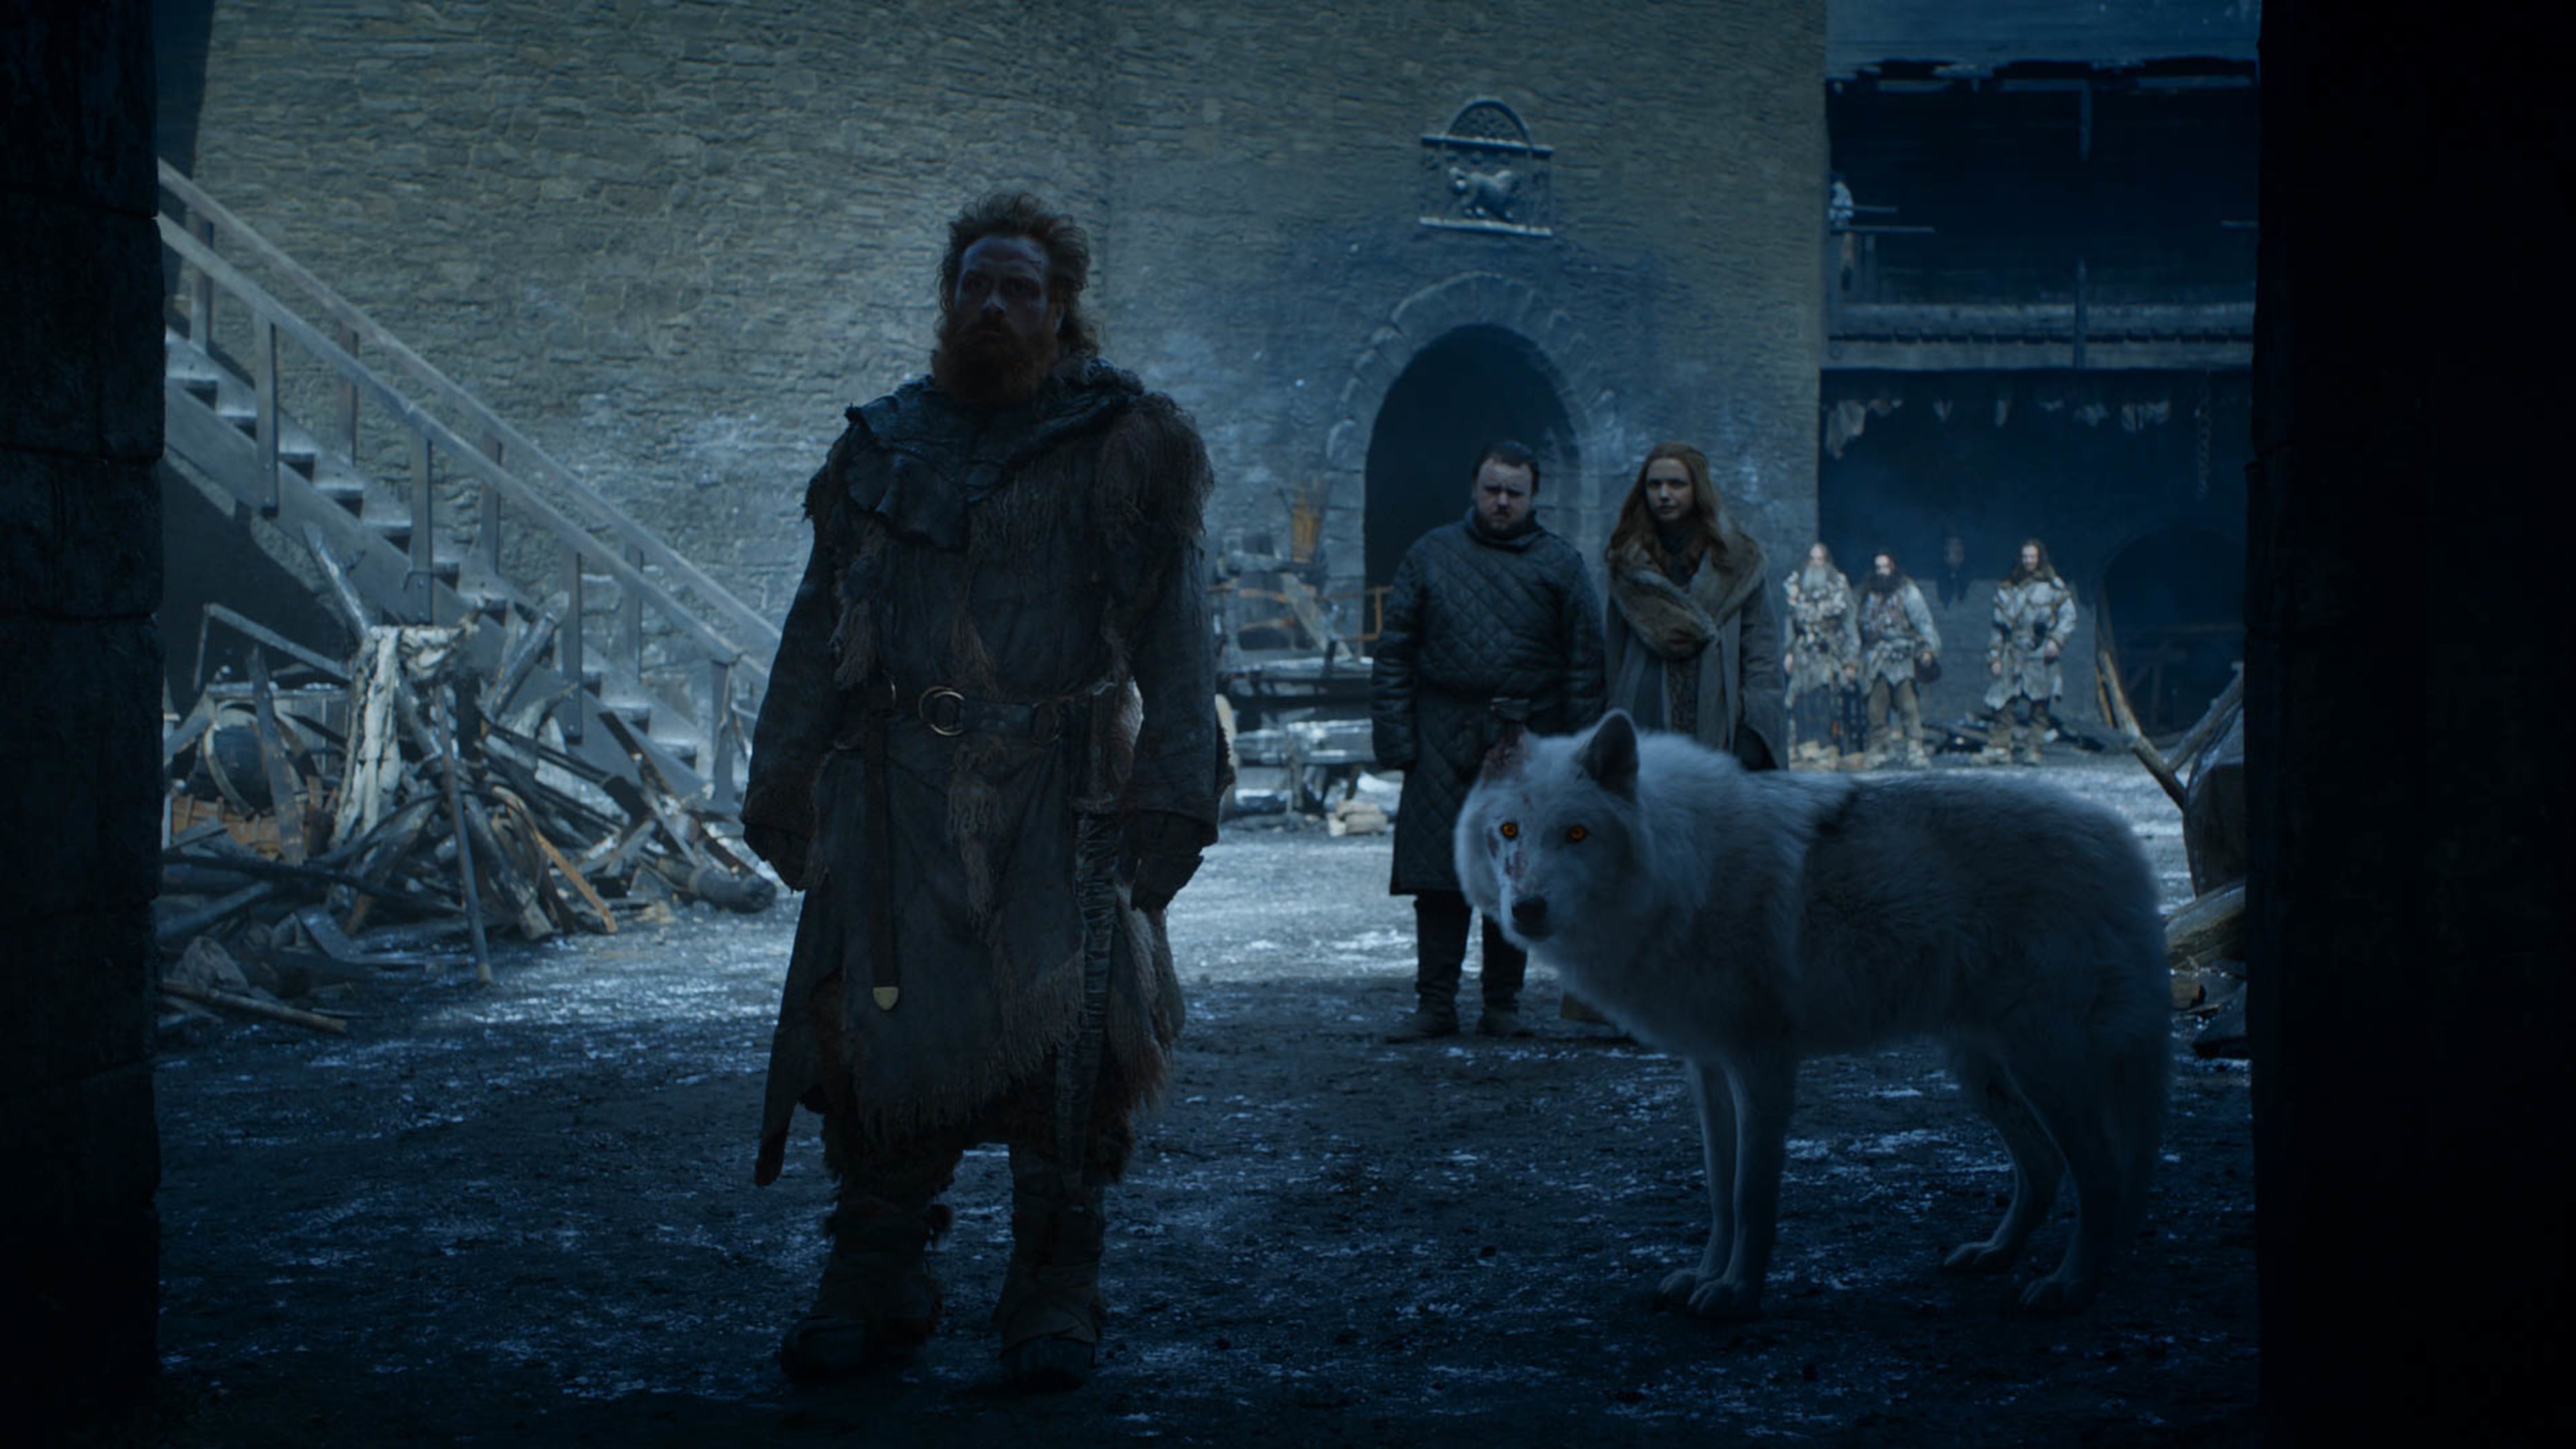 Fangs For The Fantasy: Game of Thrones, Season 1, Episode 1